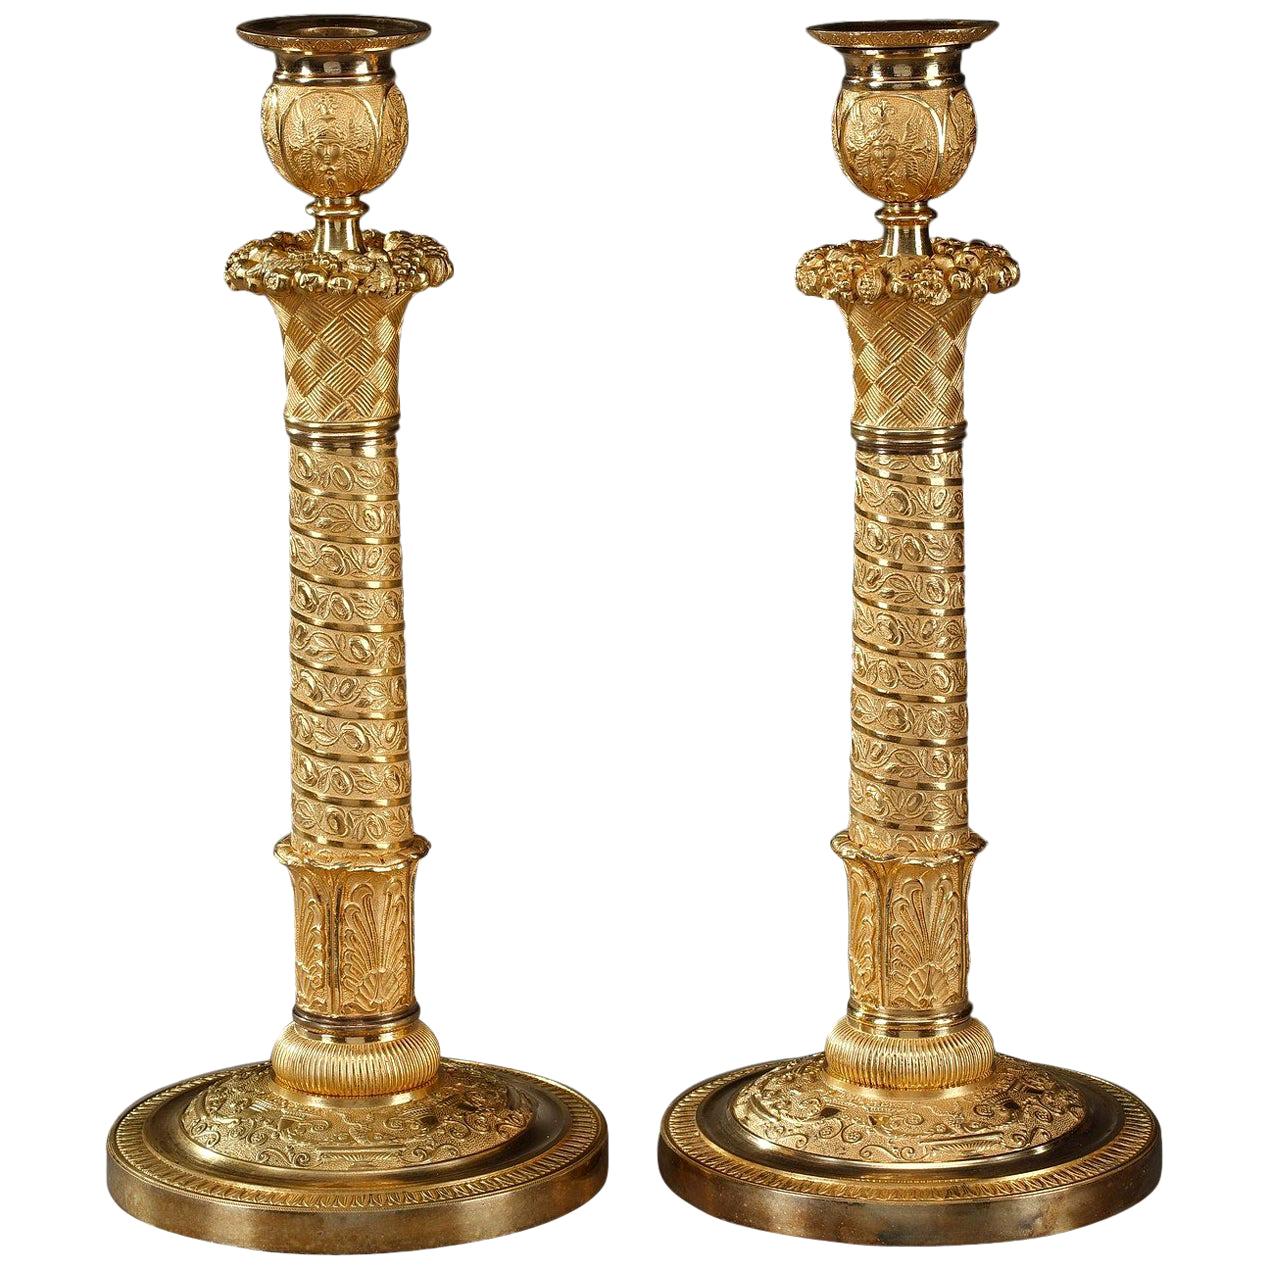 Pair of Table Lamps Candle Holders in Trajan's Column Style